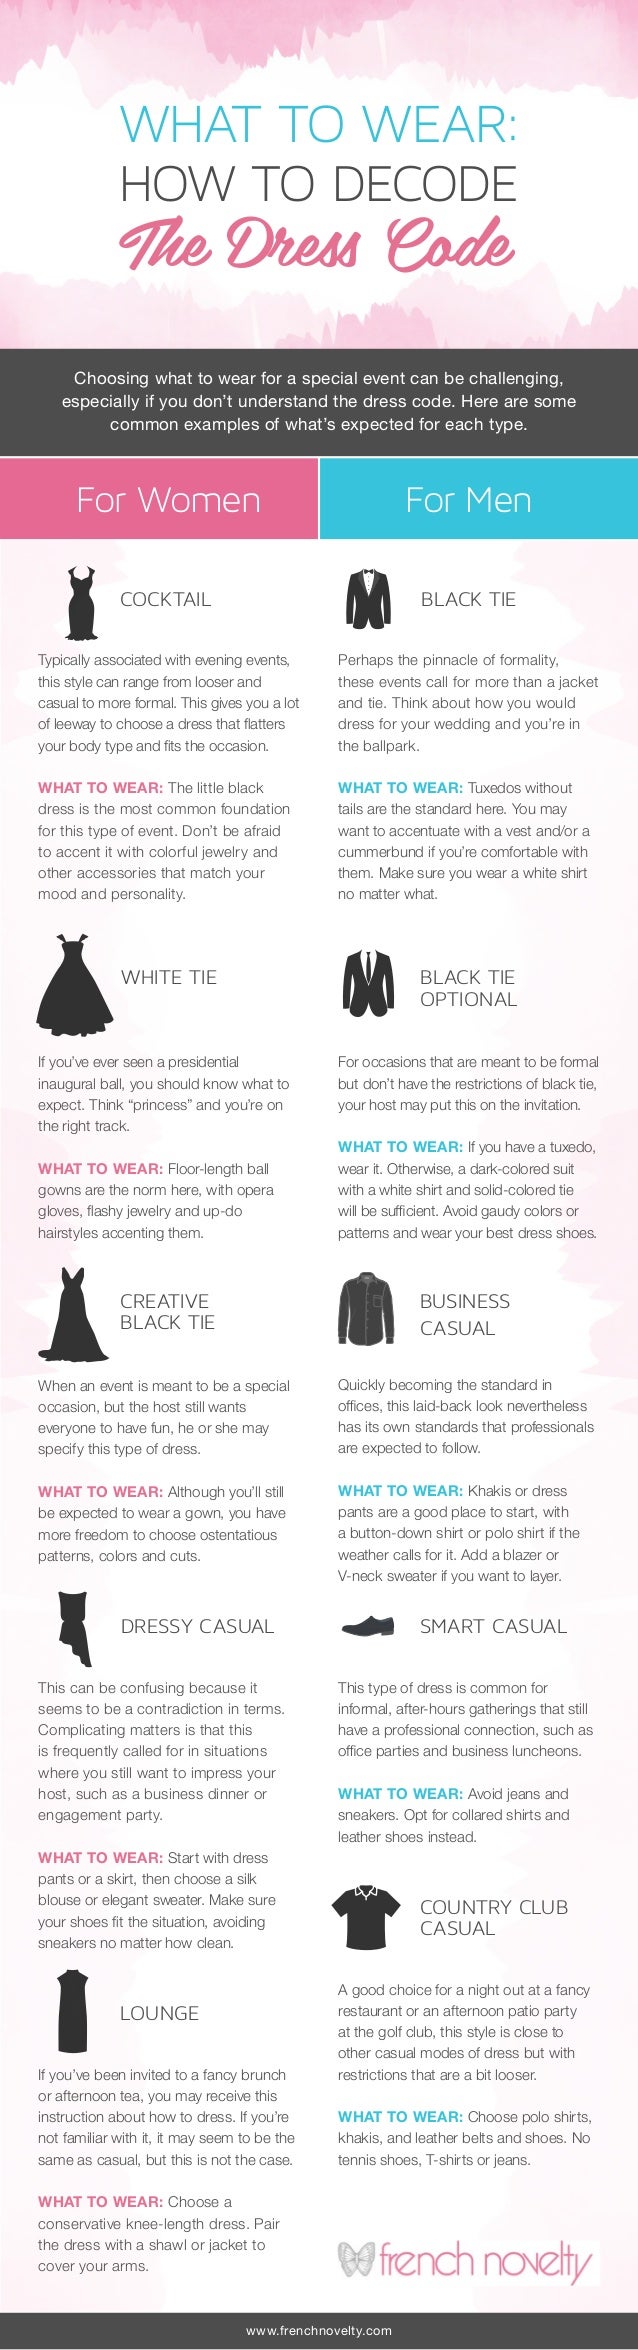 How To Decode The Dress Code For A Wedding - Wedding411 On Demand